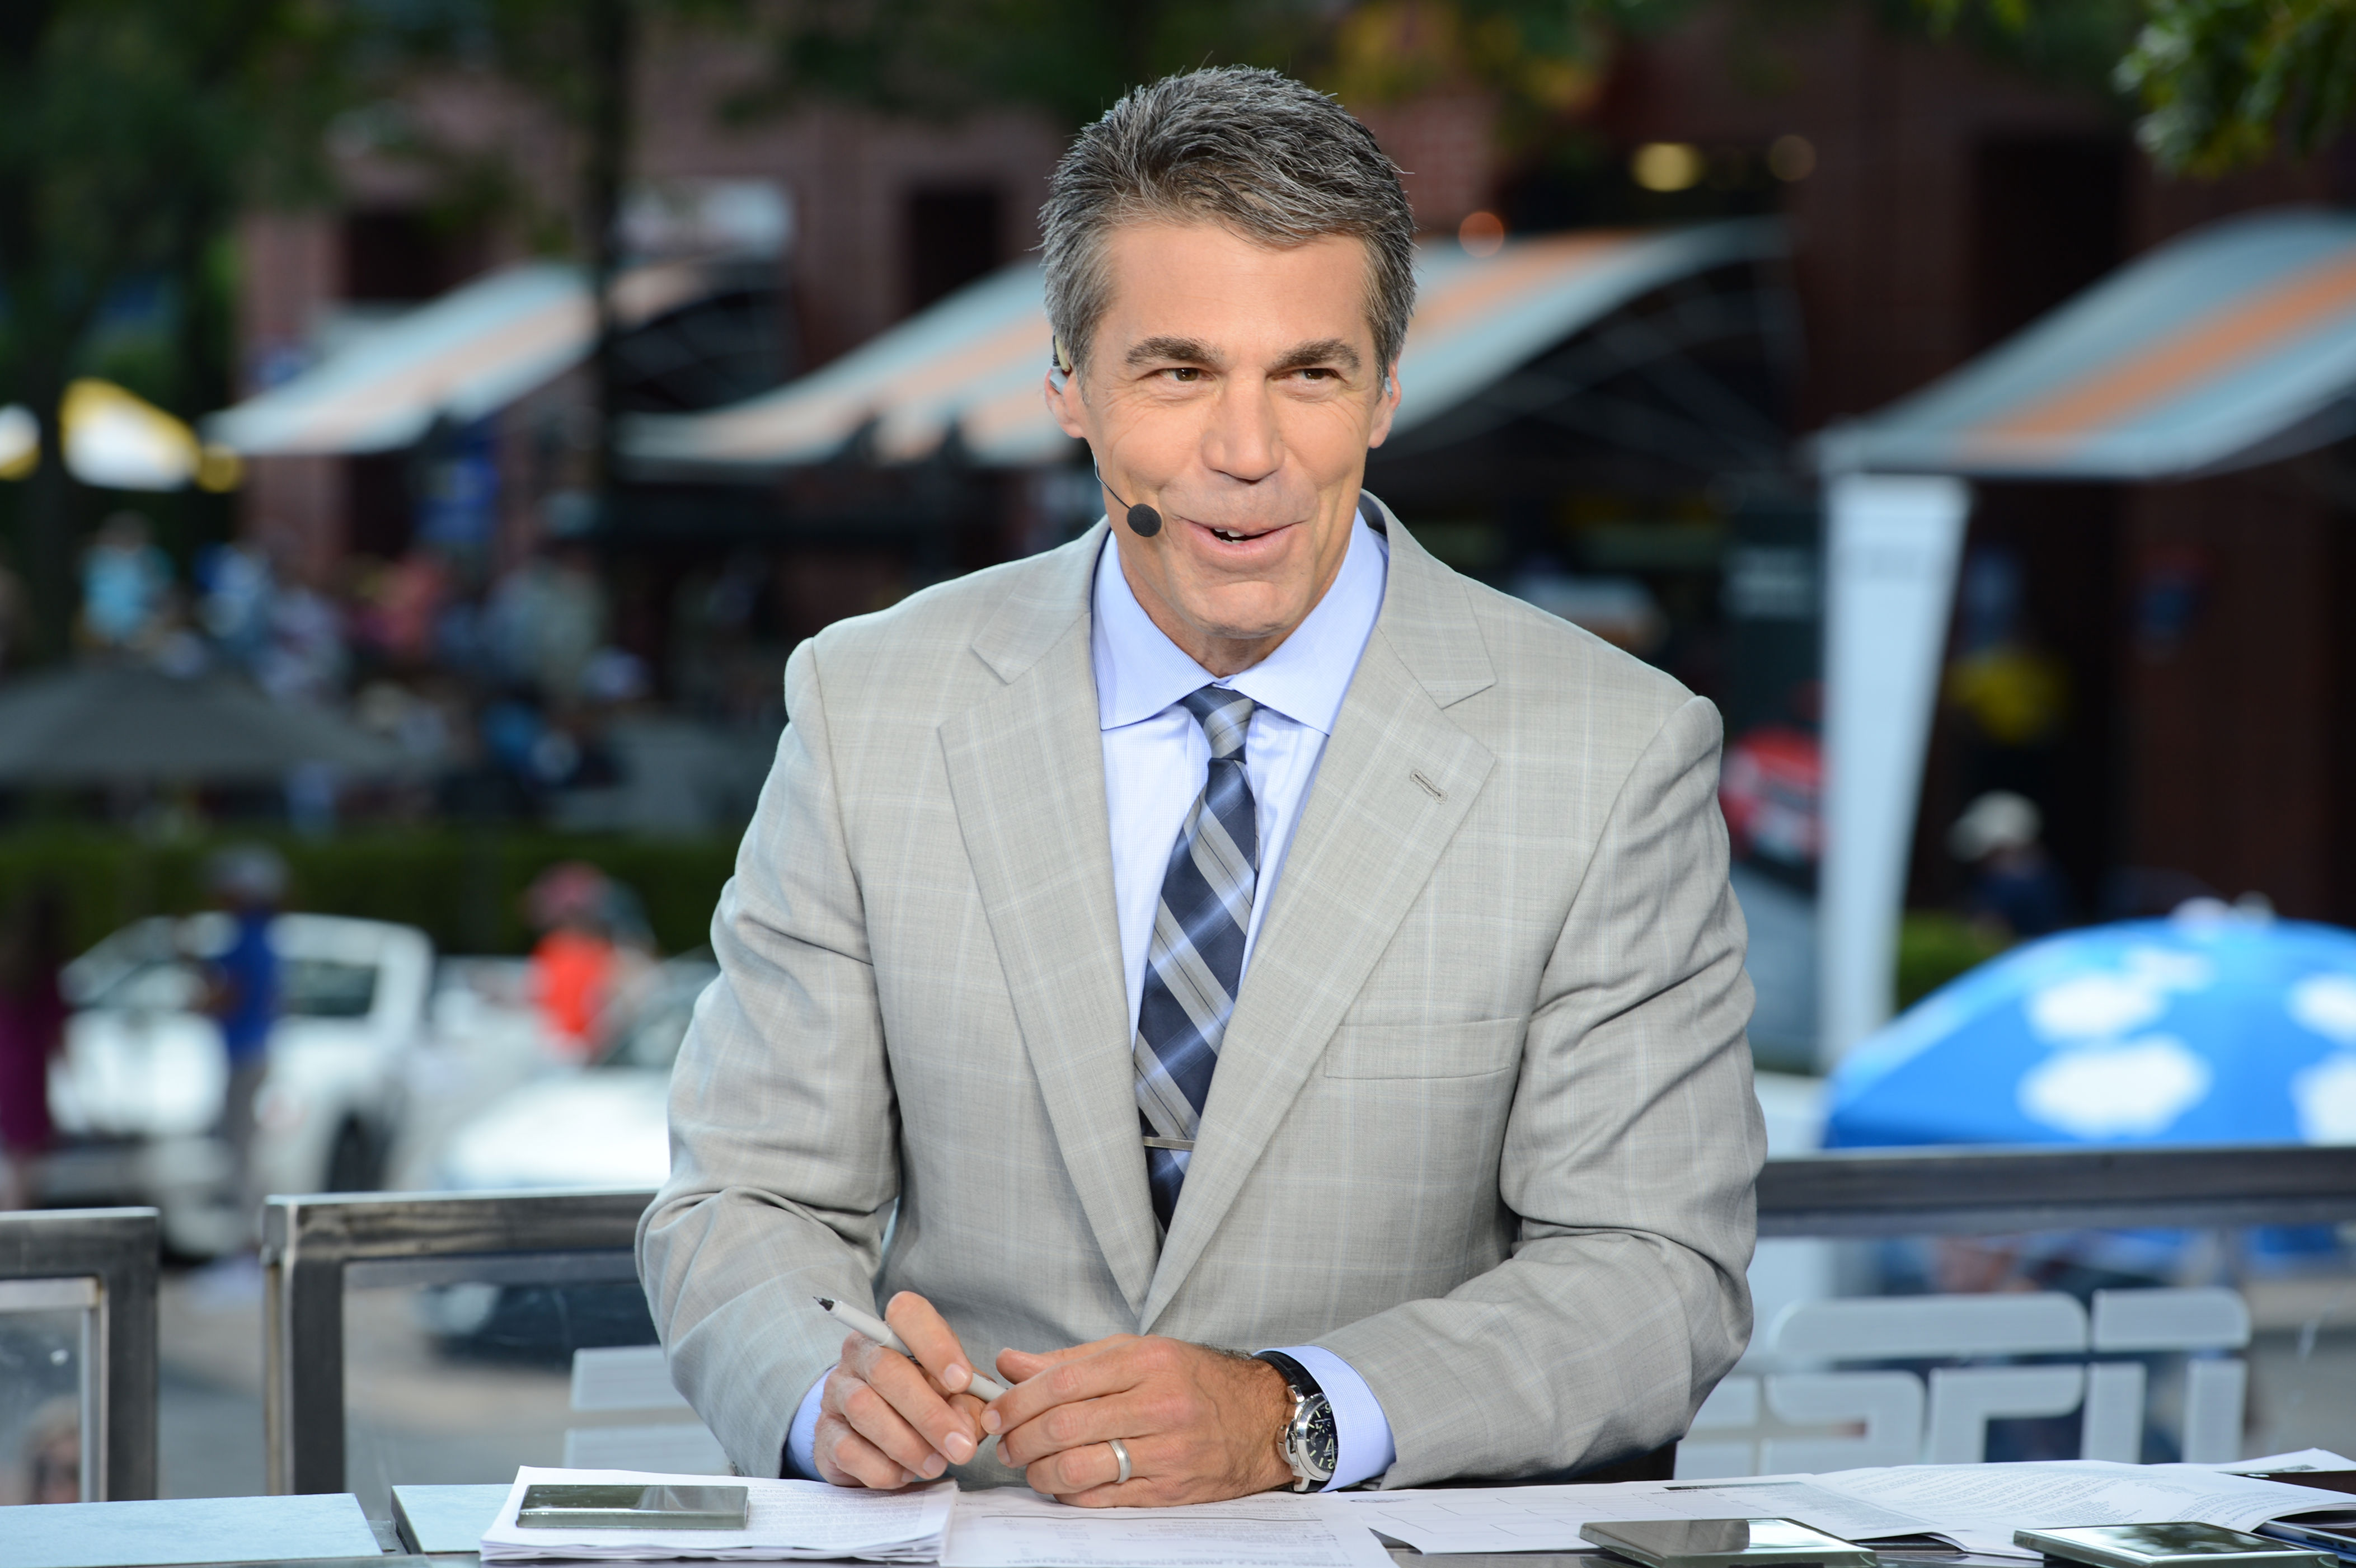 titans - dolphins announcers: who's calling the mnf game on espn in week 14?